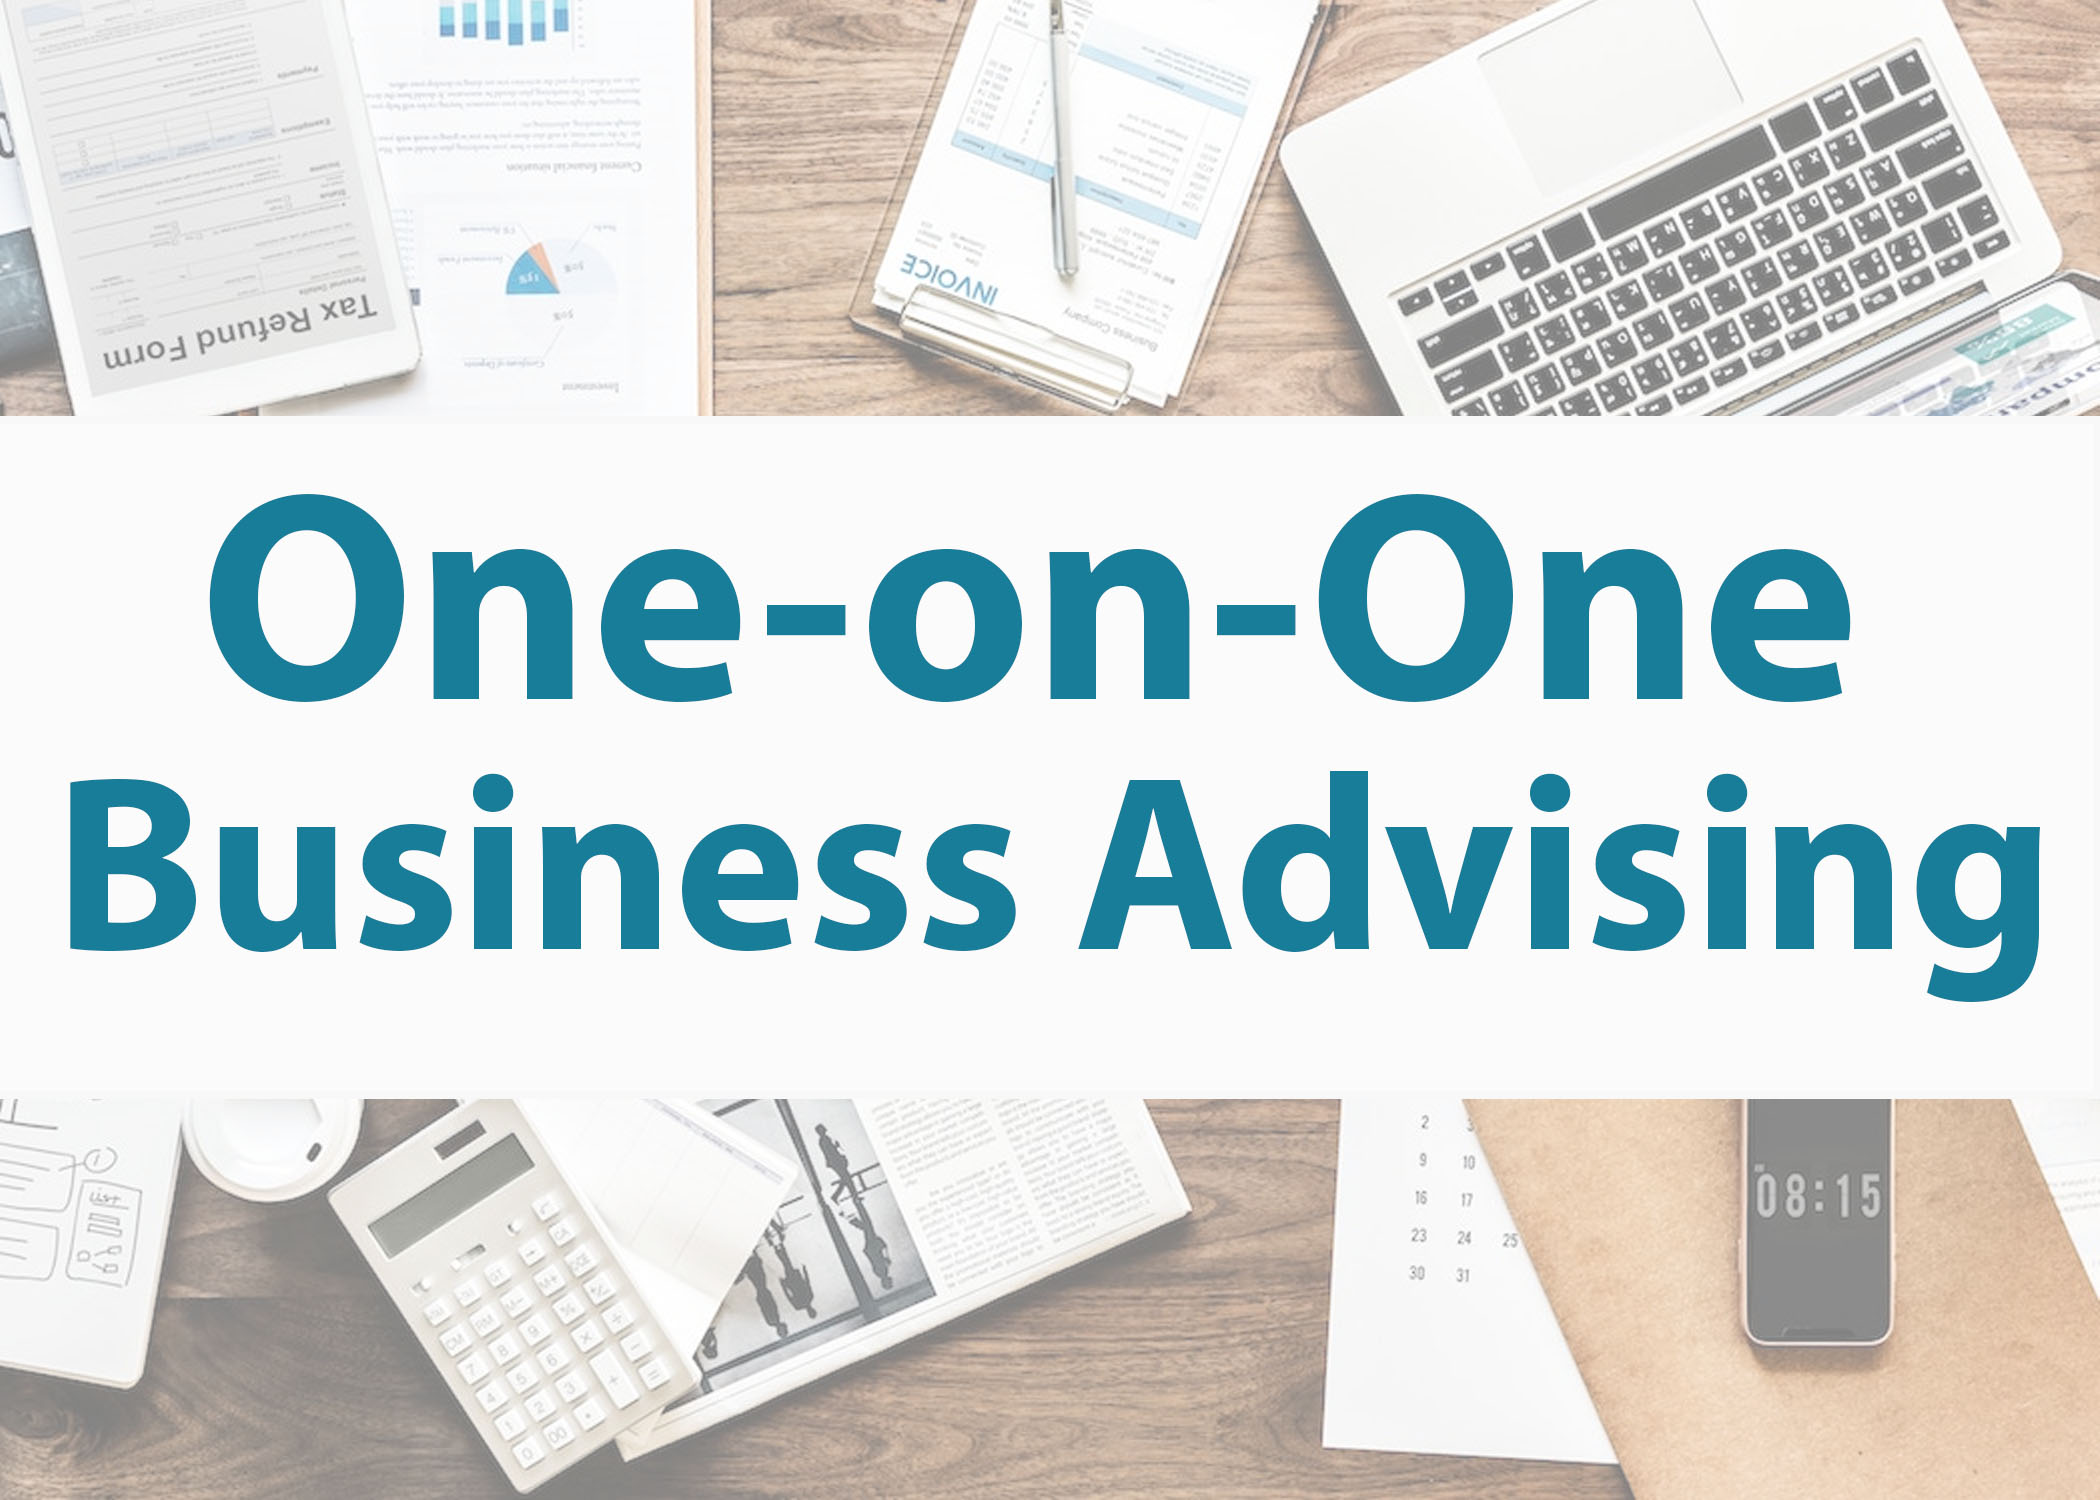 One-on-one business advising